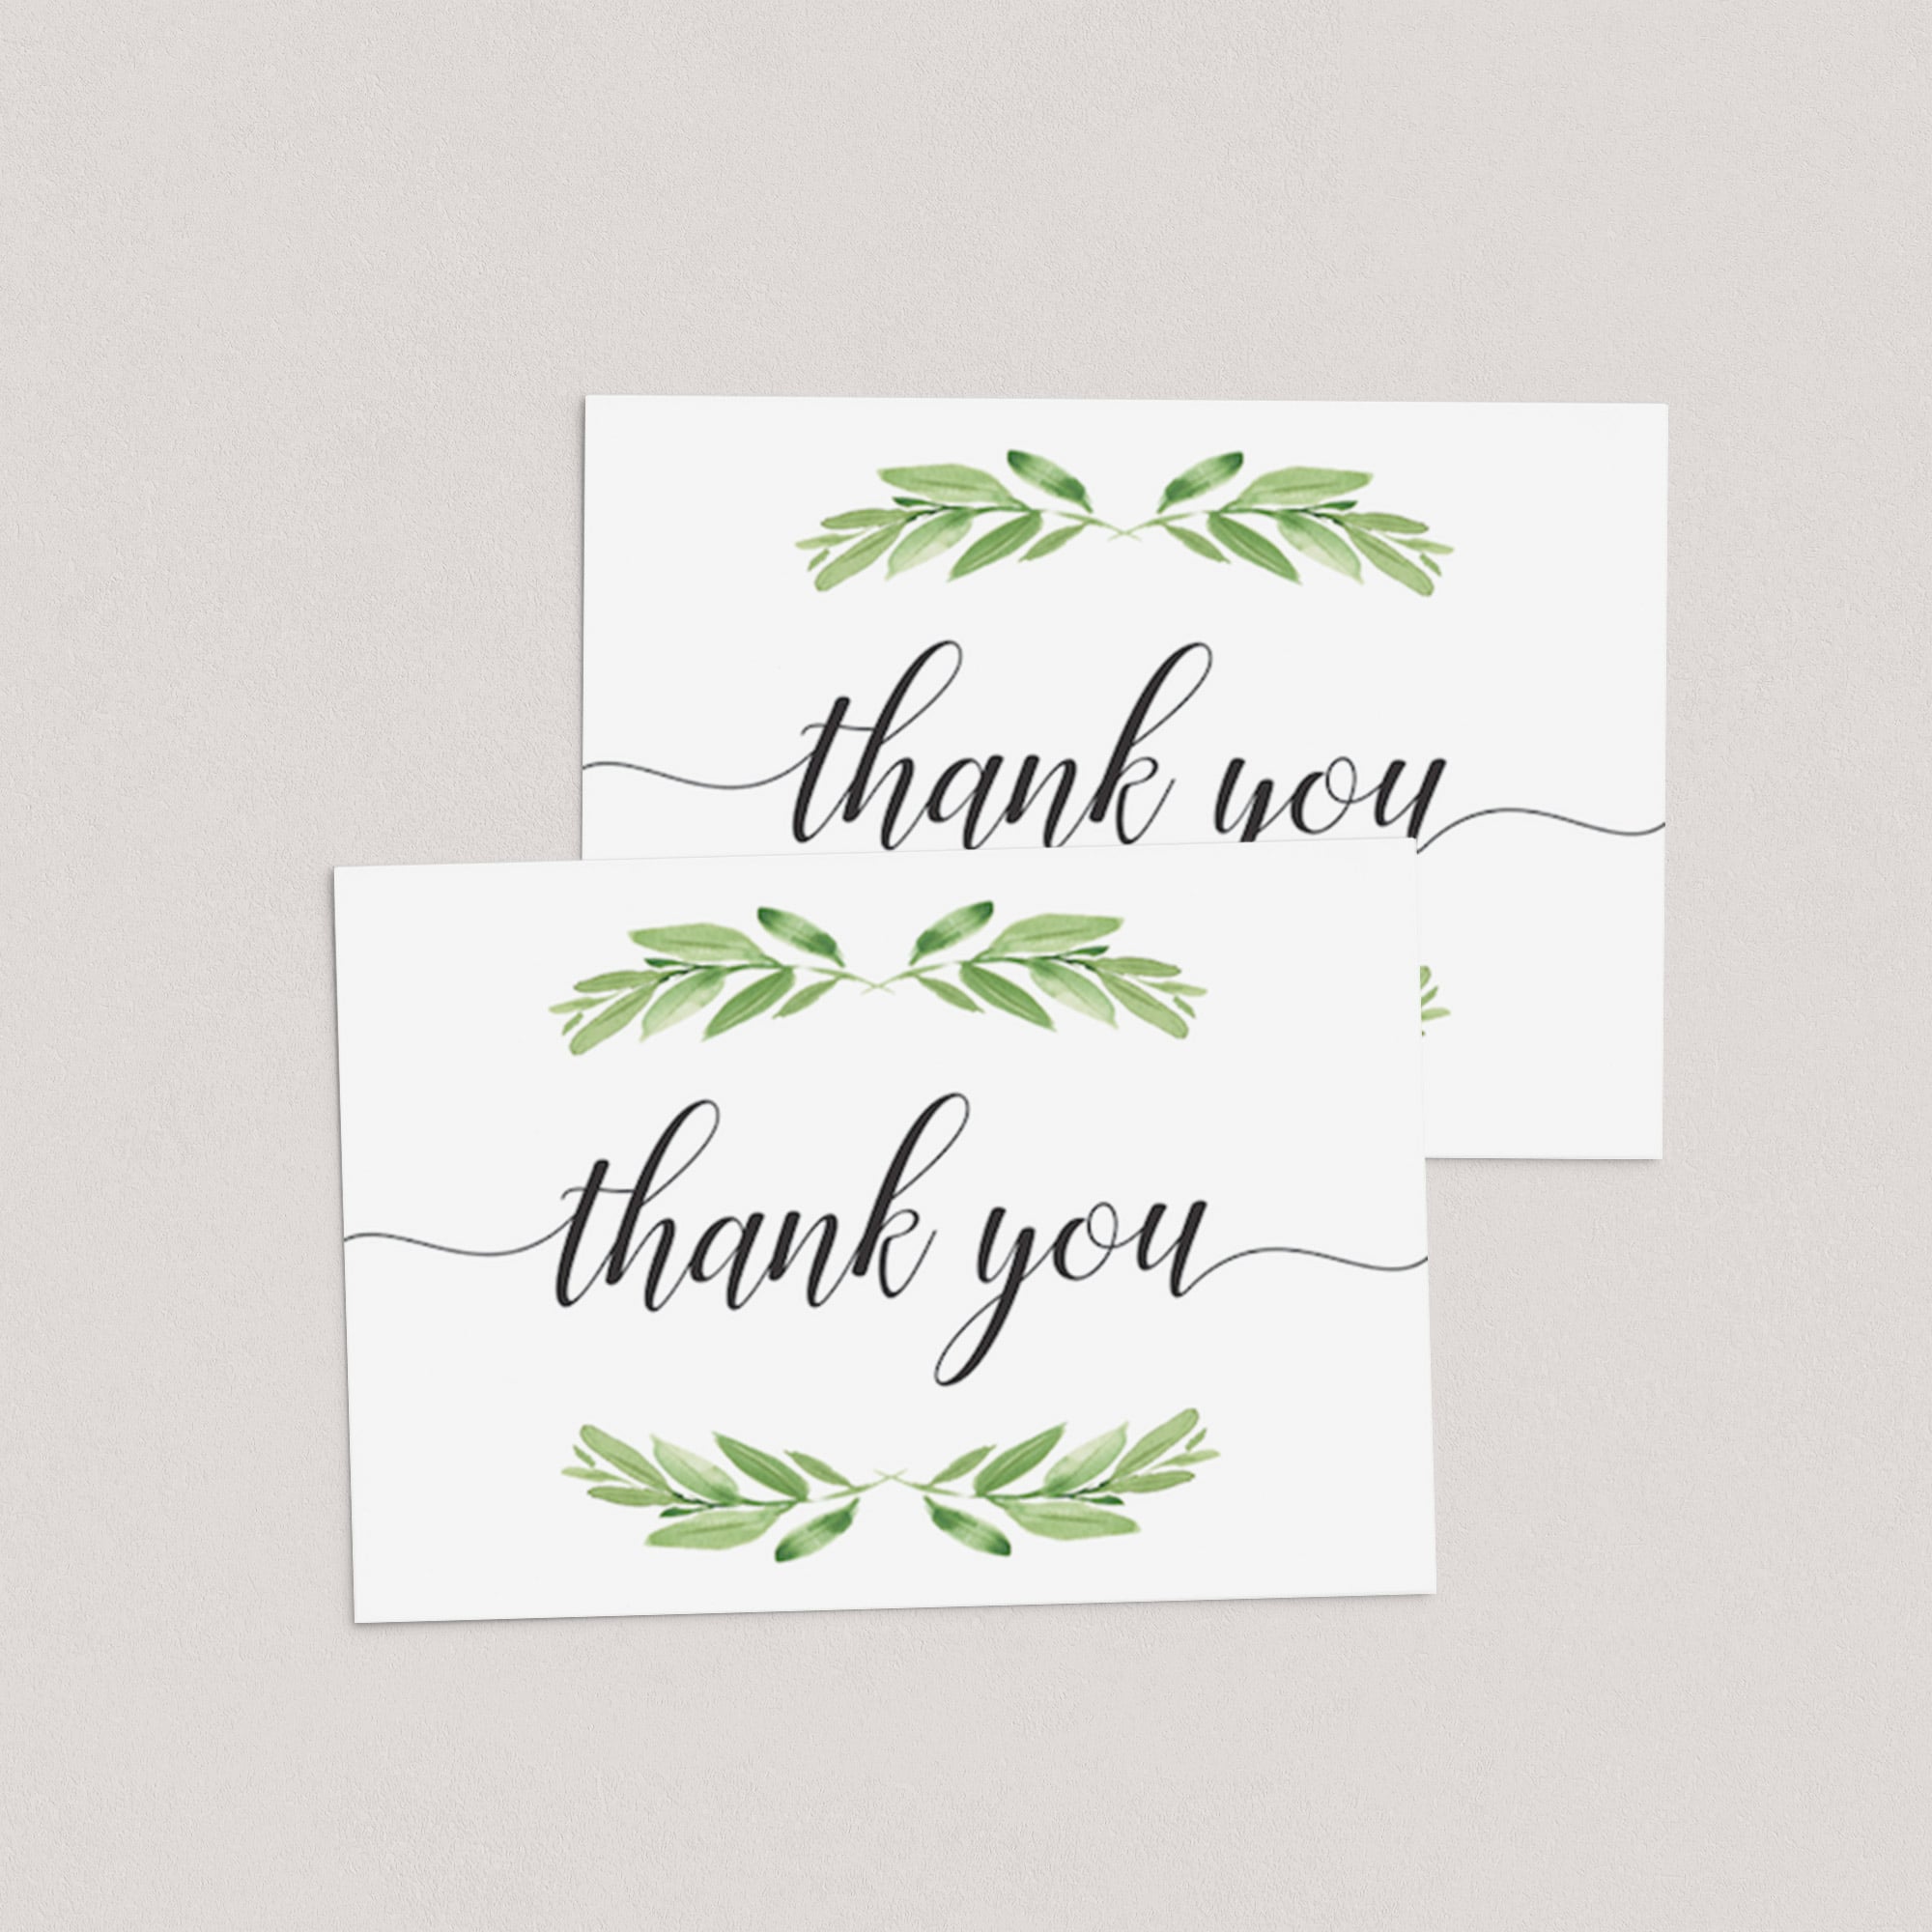 Thank you  cards download by LittleSizzle